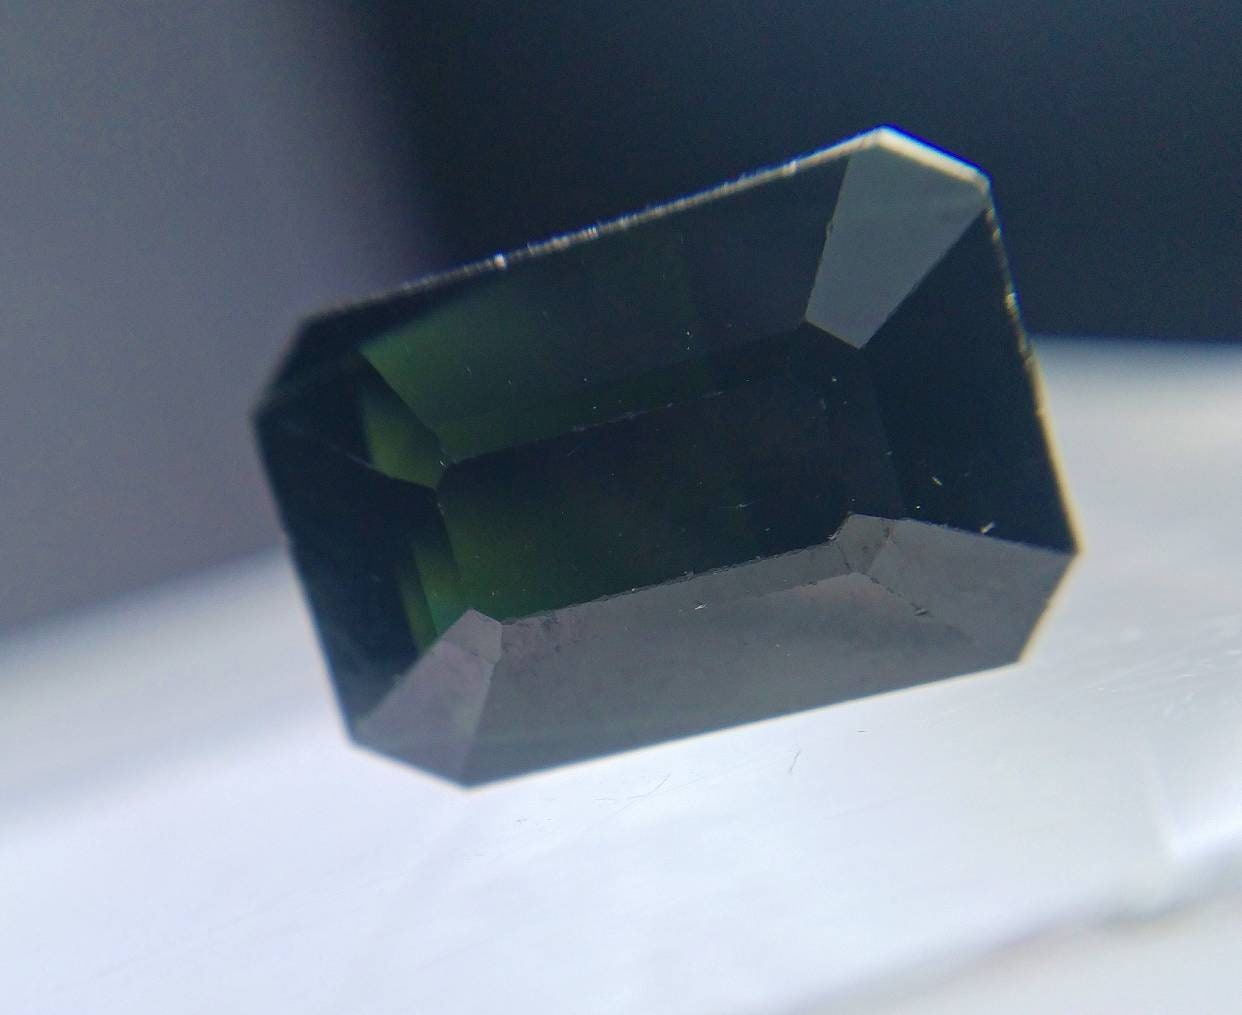 ARSAA GEMS AND MINERALSNatural top quality beautiful 6 carats faceted radiant shape dark green tourmaline gem - Premium  from ARSAA GEMS AND MINERALS - Just $30.00! Shop now at ARSAA GEMS AND MINERALS